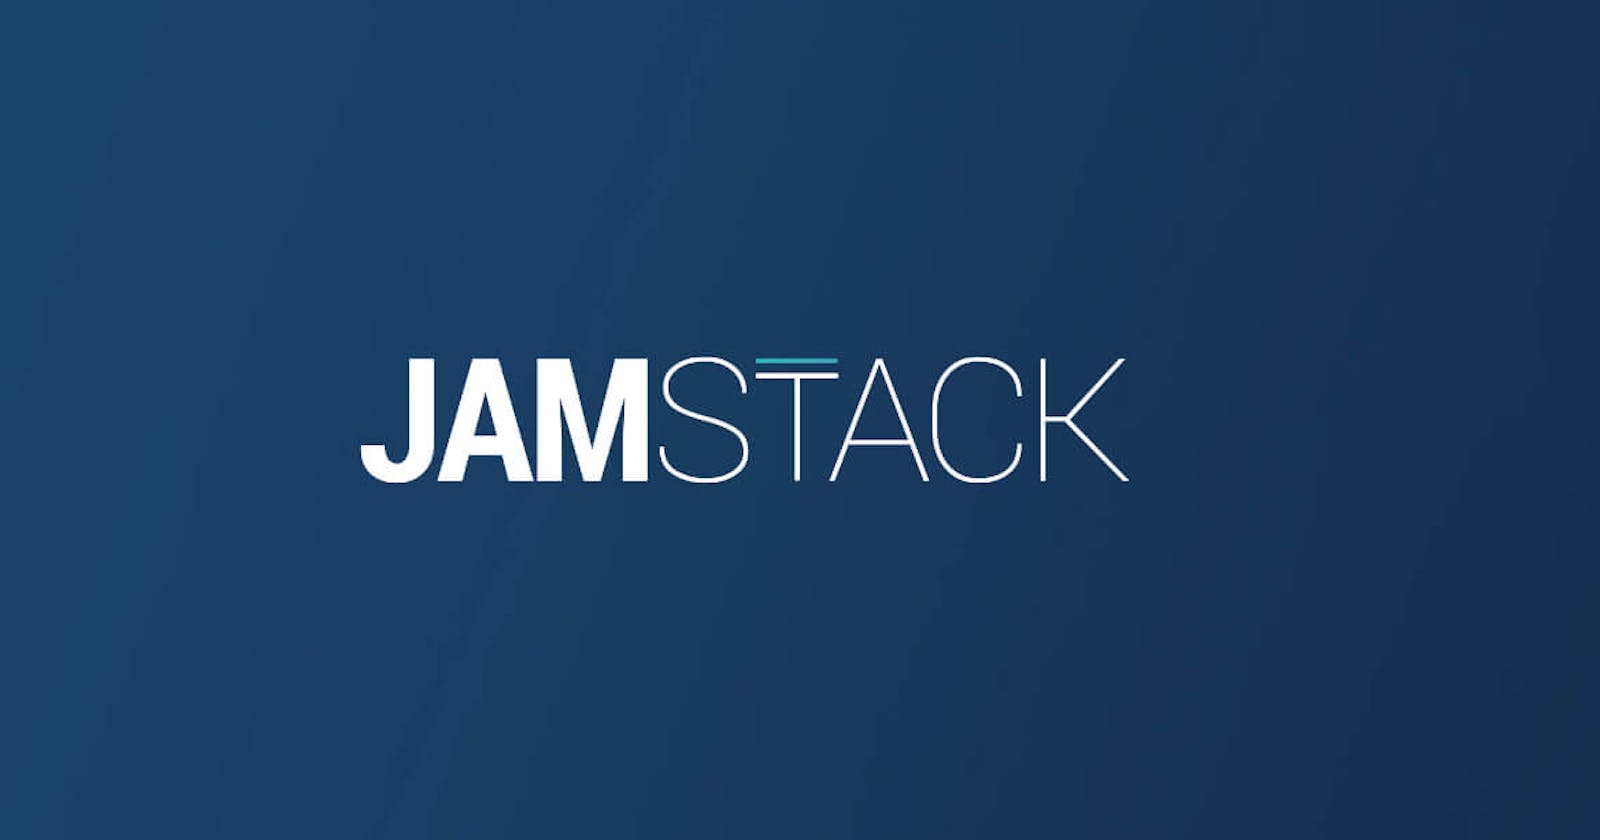 The JAMstack in 2019: Why (and How) to Get Started